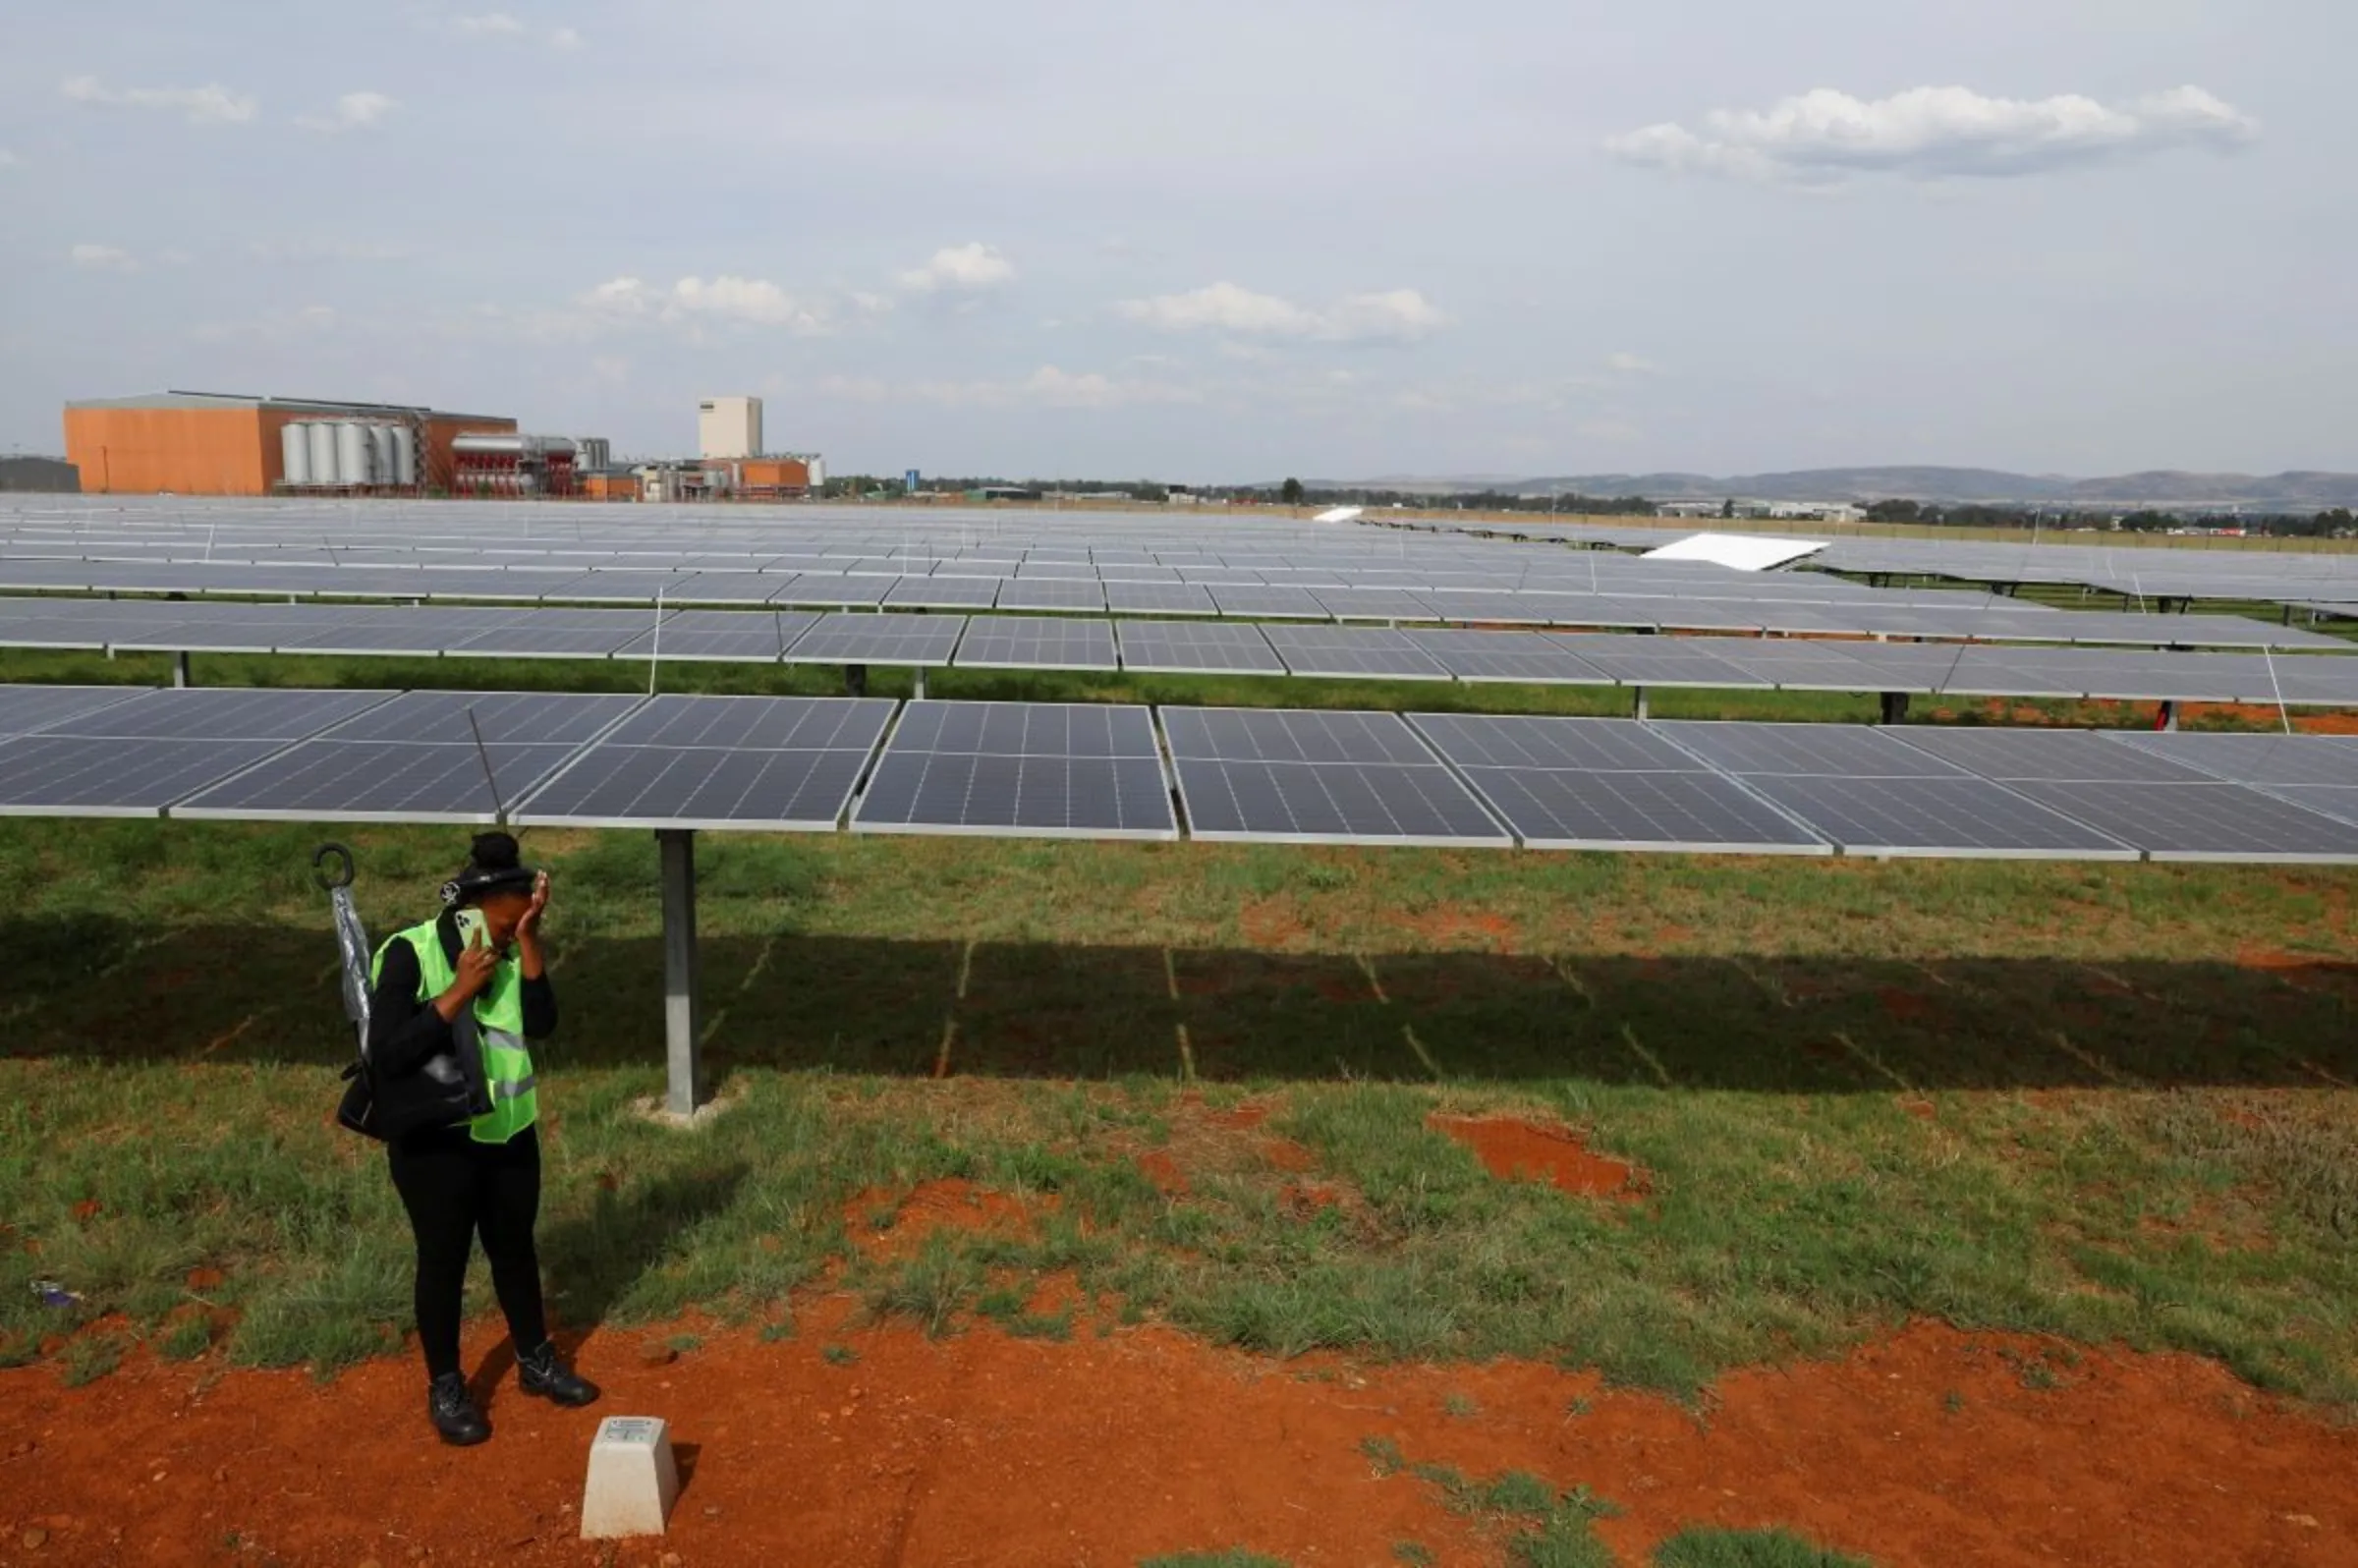 A visitor speaks on the phone while standing next to a new solar power plant in Johannesburg, South Africa, October 26, 2022. REUTERS/Siphiwe Sibeko